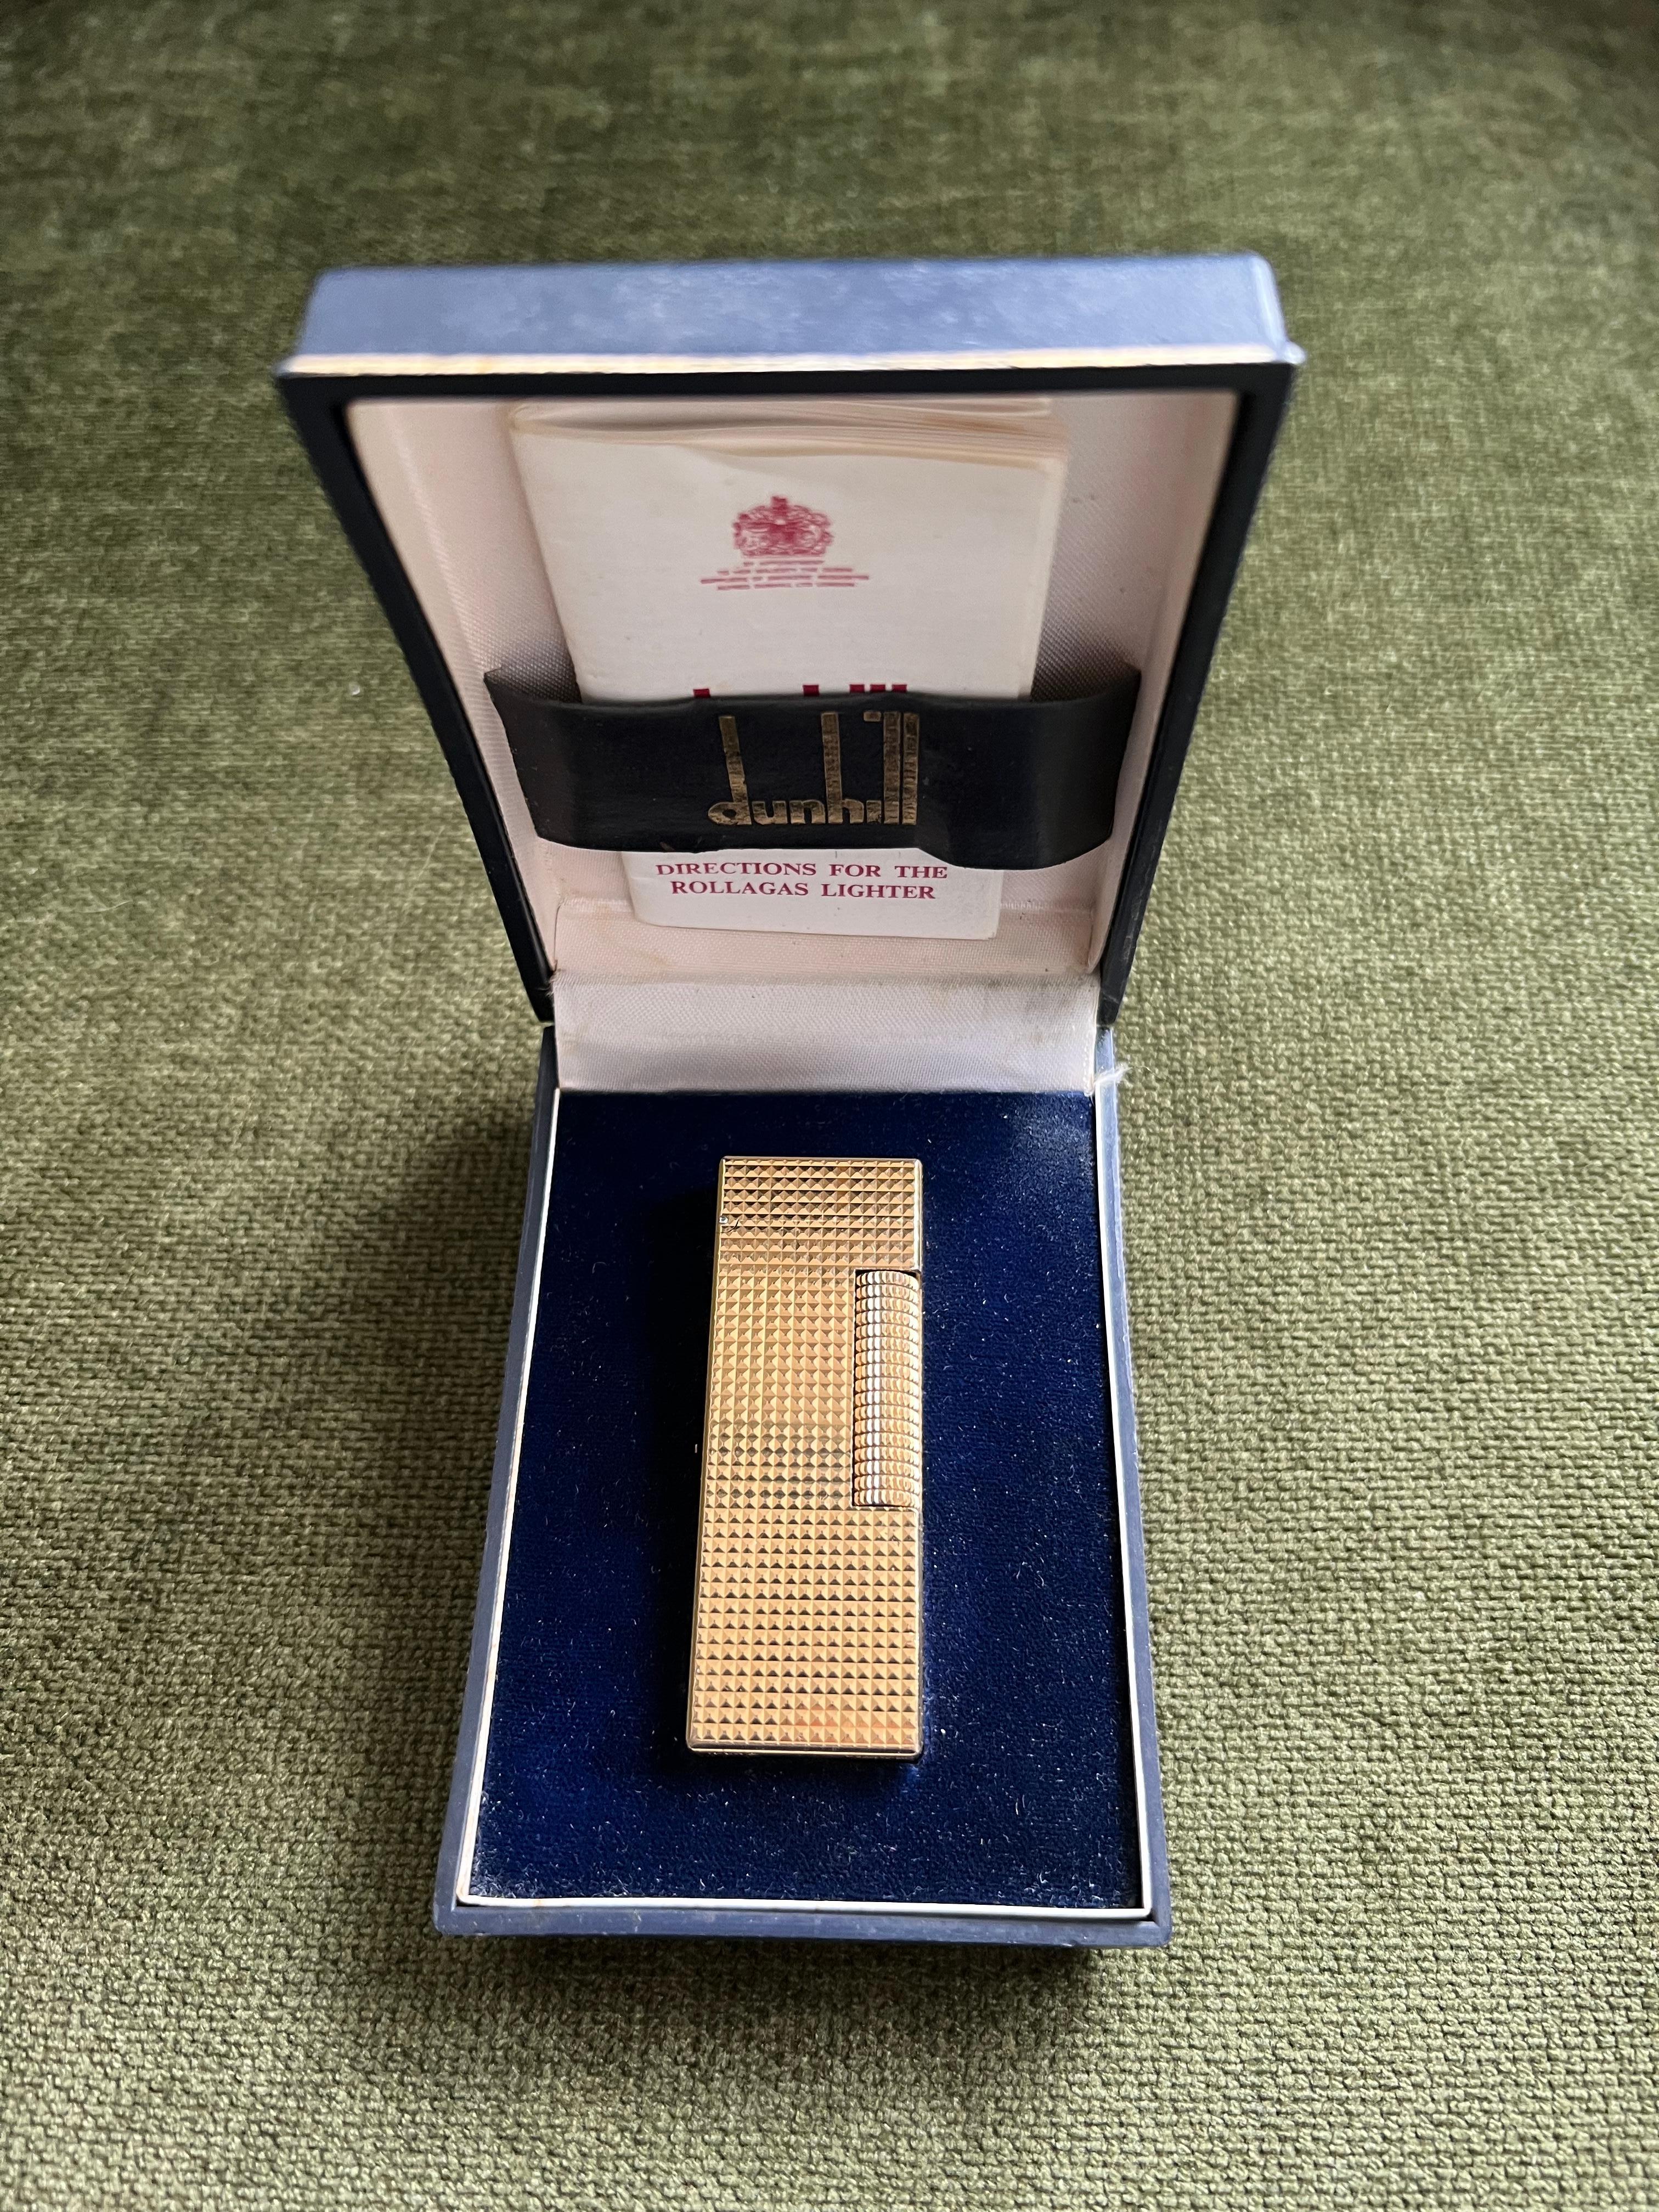 Vintage Dunhill Diamond Pattern Gold Plated Lighter 
Circa 1970
Retro 
In fantastic working condition 
The lighter sparks, ignites and flames 
Built like a tank
All original parts 
Comes with original Dunhill case and papers 